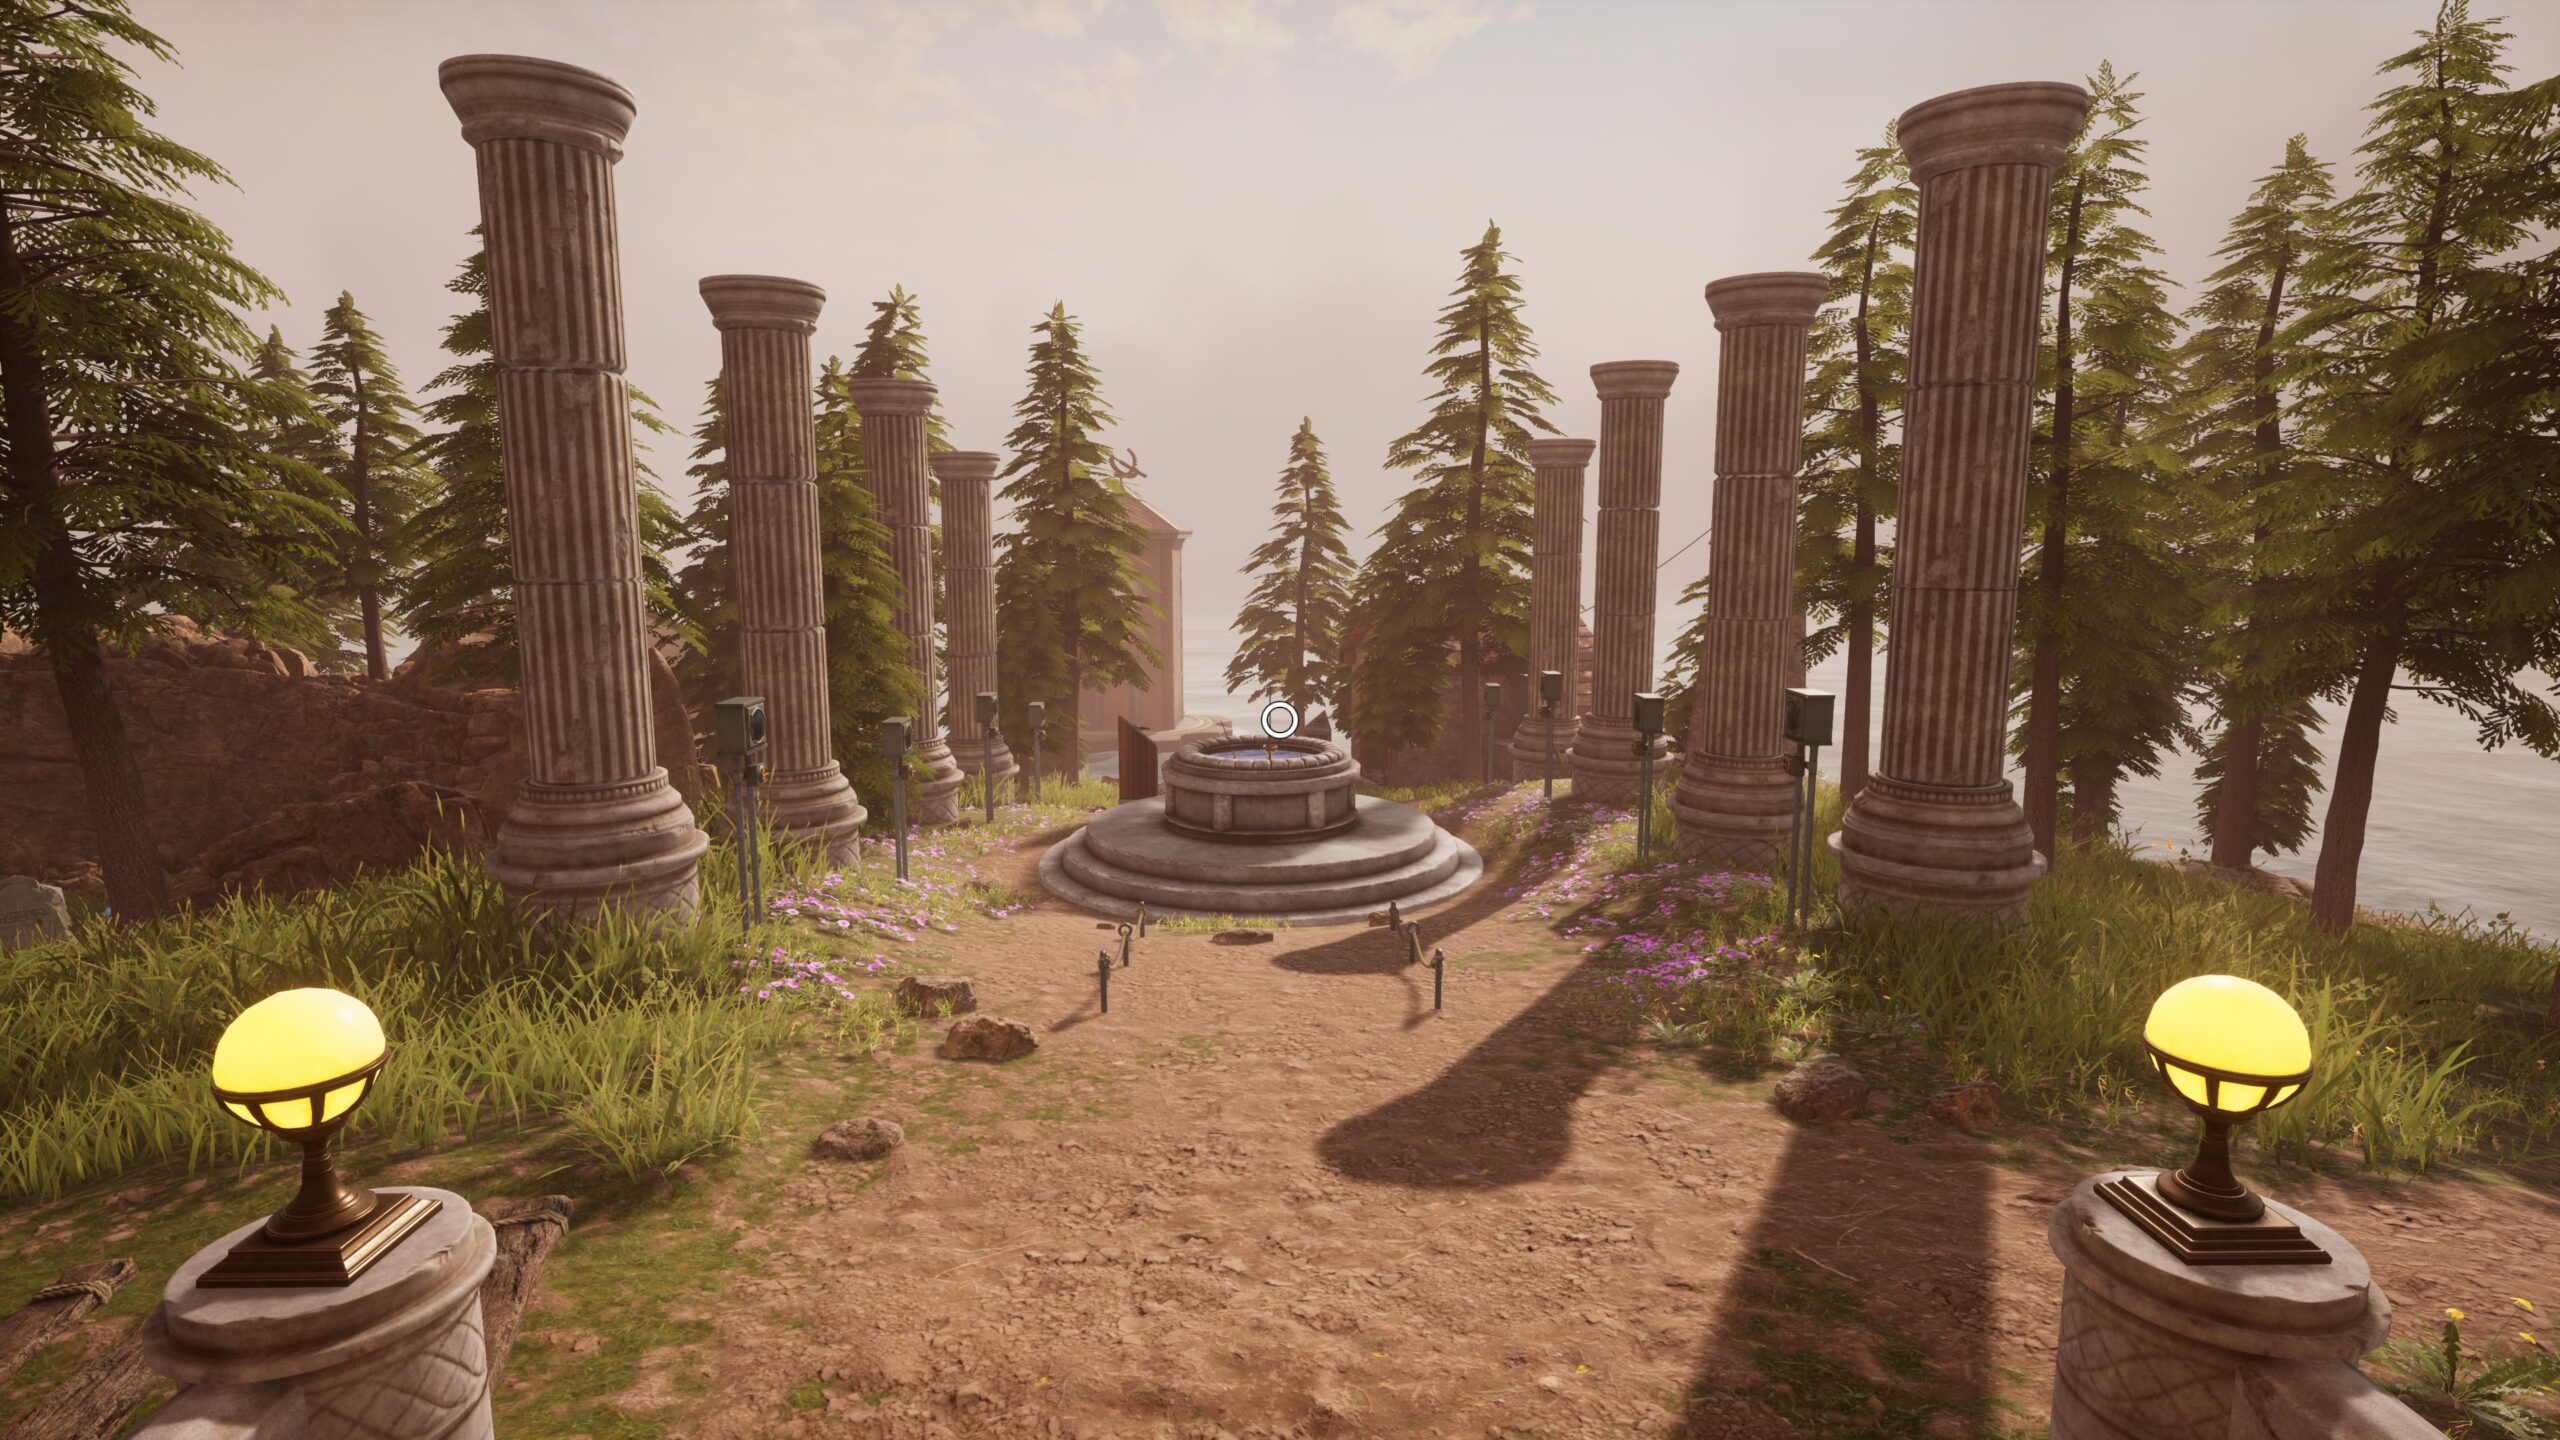 Scene from the game Myst